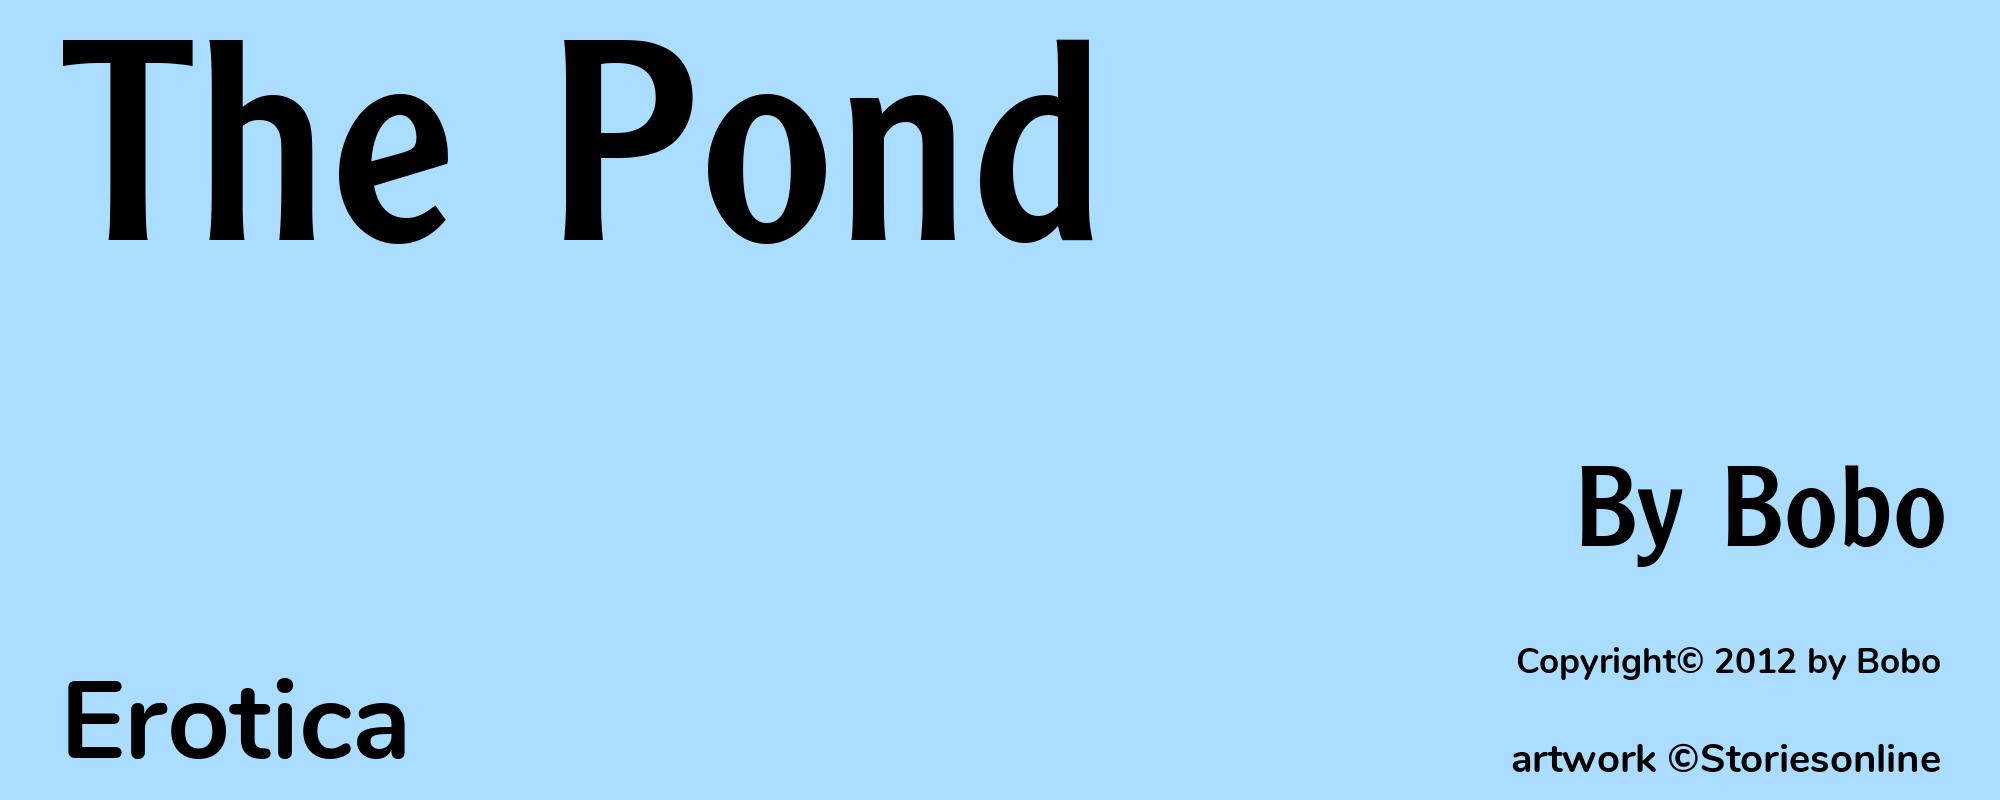 The Pond - Cover